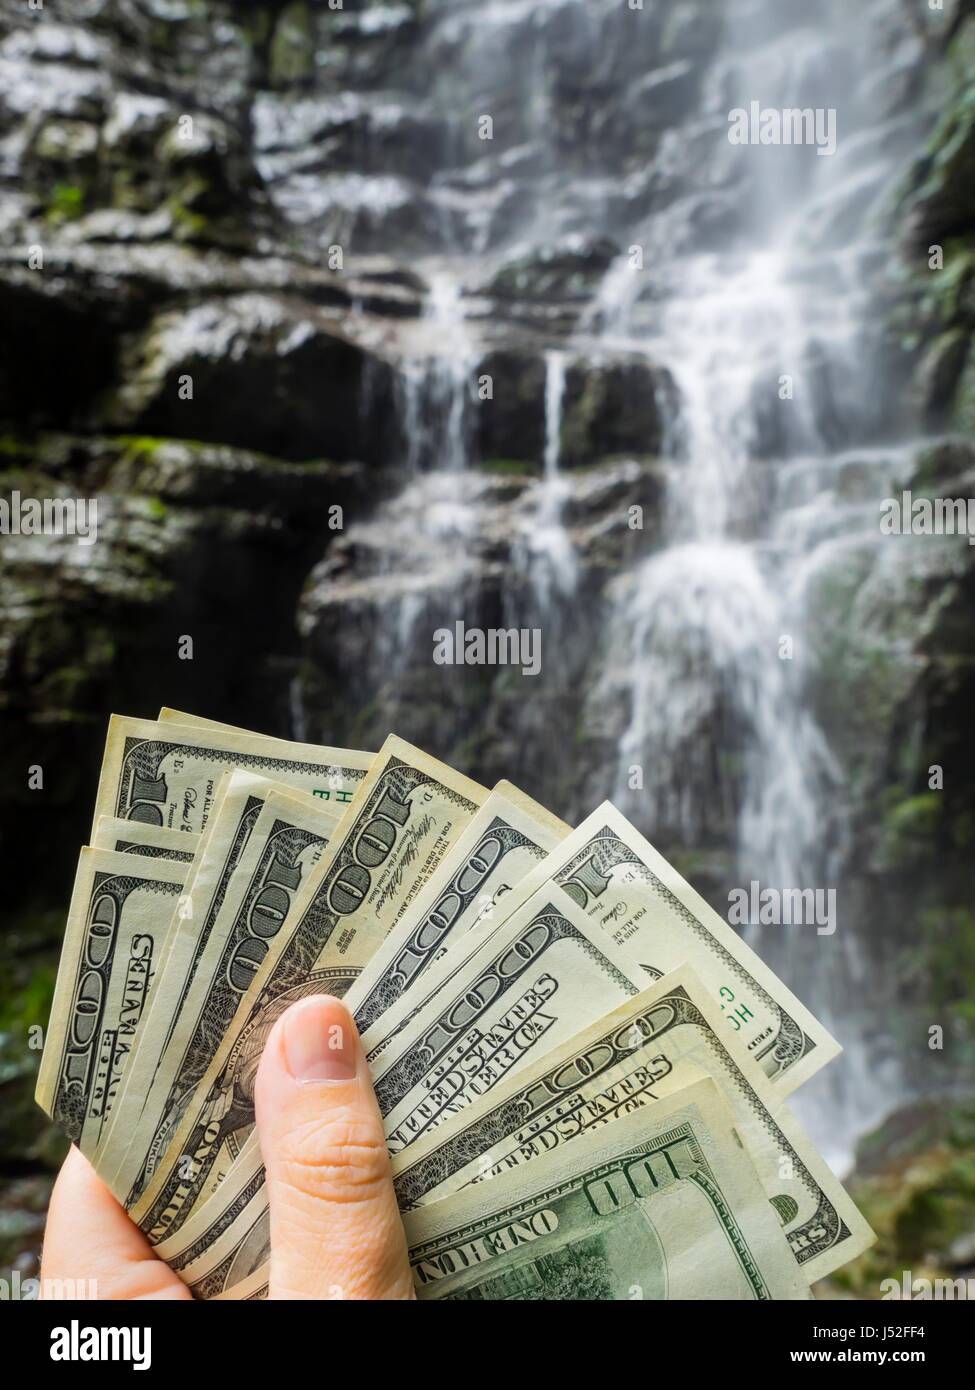 Fresh pour pouring drinking water is expensive money in hand blurry background rocky terrain rocks value valuable price to pay environmental Stock Photo